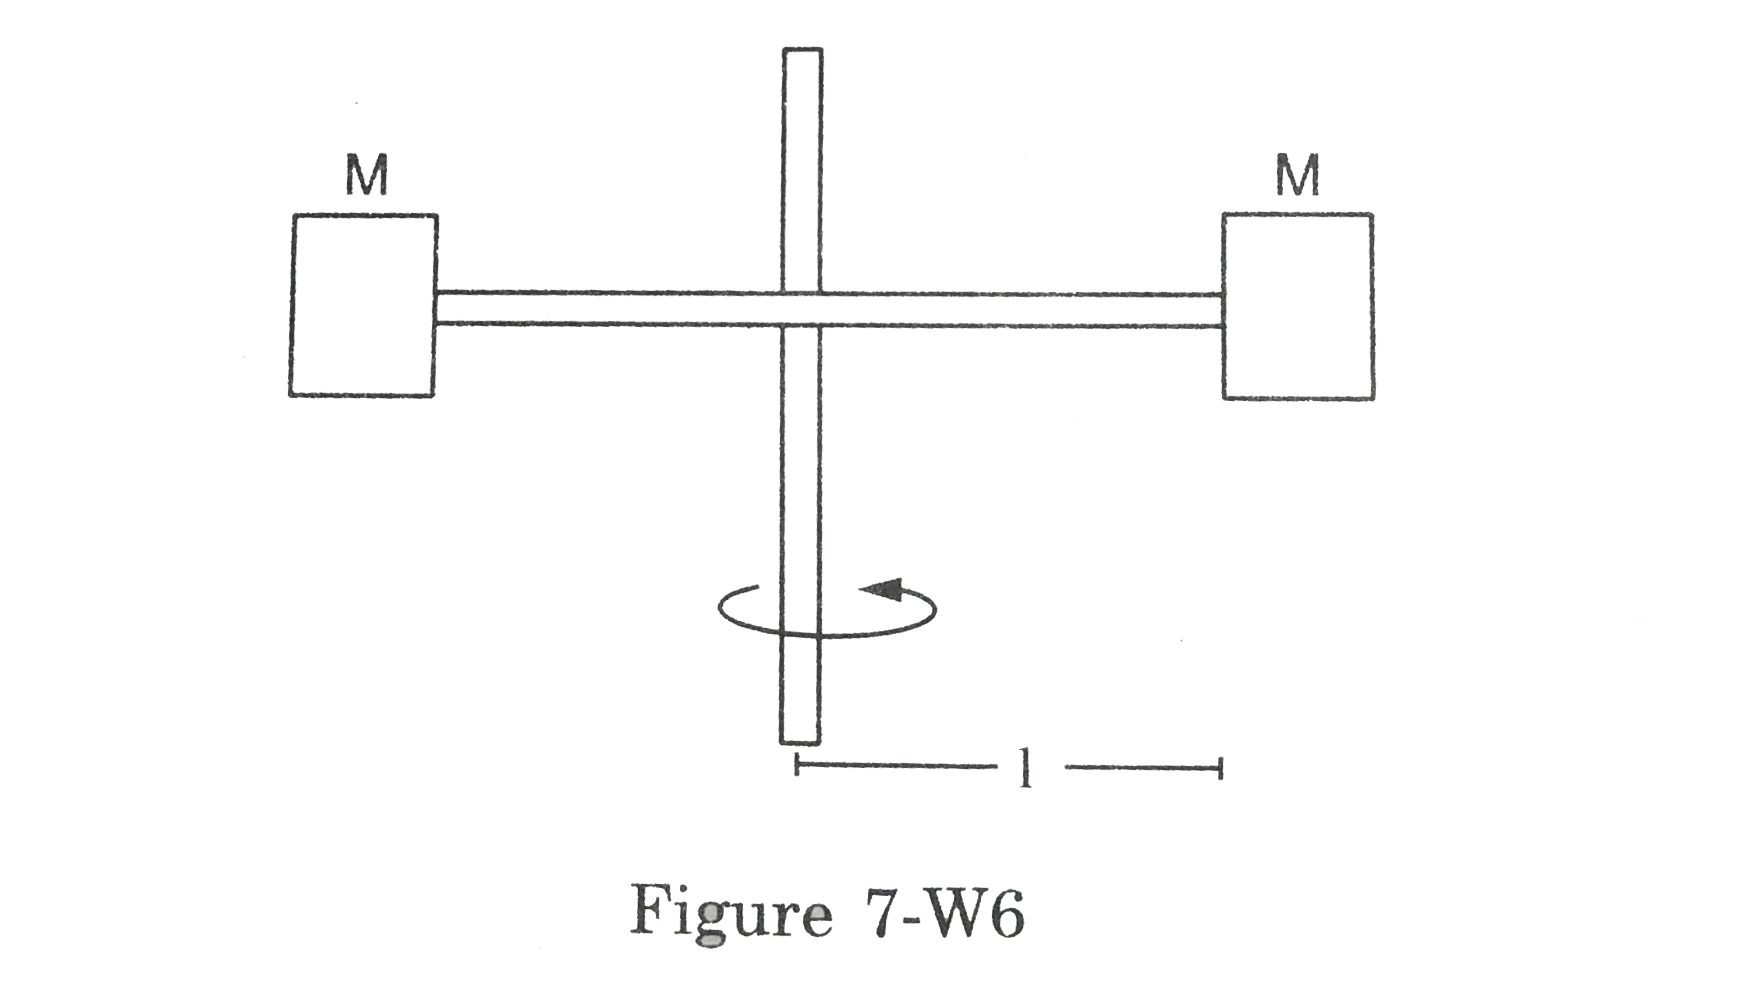 Two blocks each of mass M are connected to the ends of a light frame as shown in figure. The frame is rotated about the vertical line of symmetry. The rod breaks if the tension in it exceeds T0. Find the maximum frequency with which the frame may be rotted without breaking the rod.